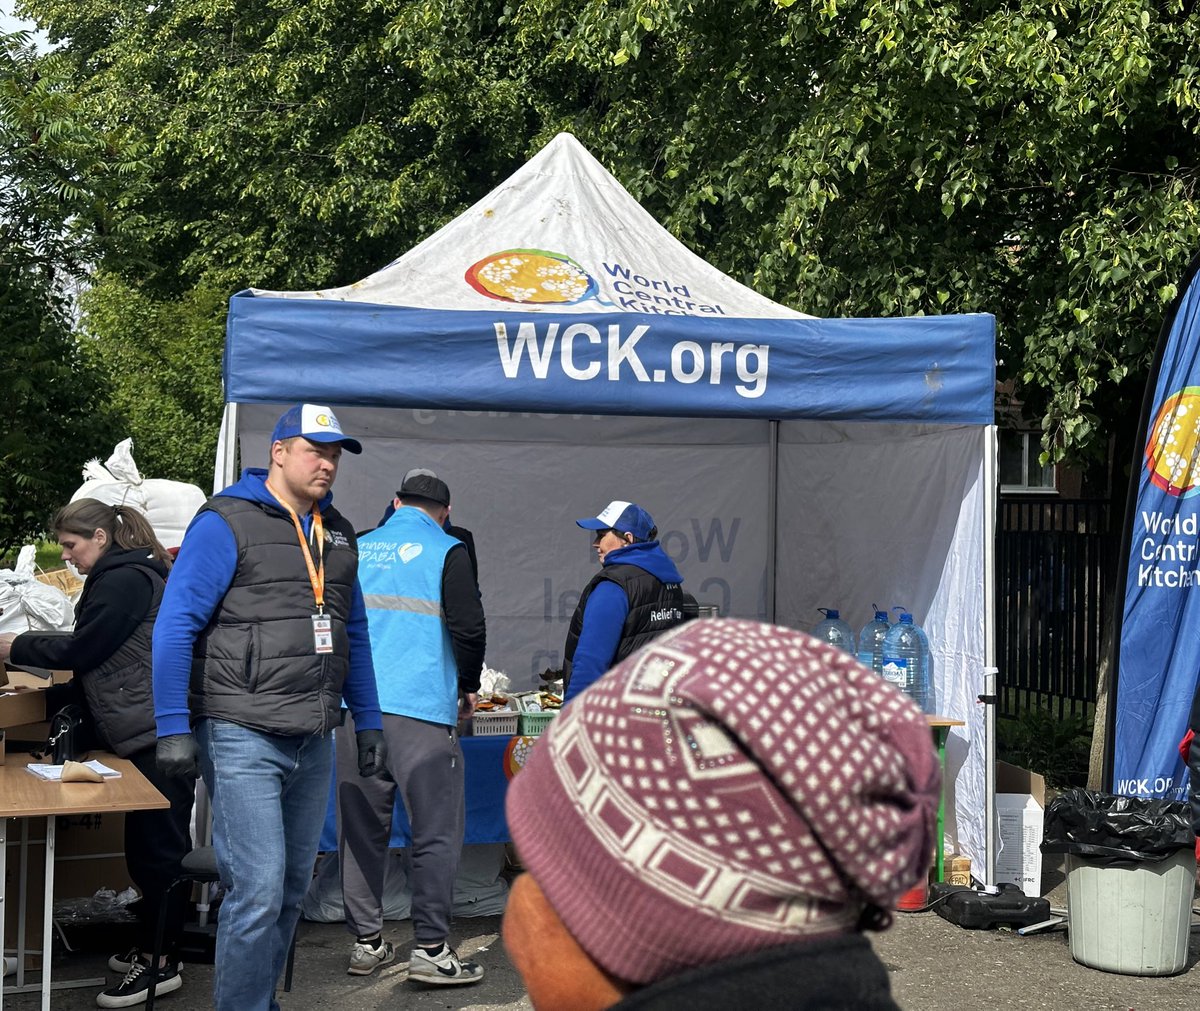 Thank you @chefjoseandres and @WCKitchen for providing support for refugees in Kharkiv this week.